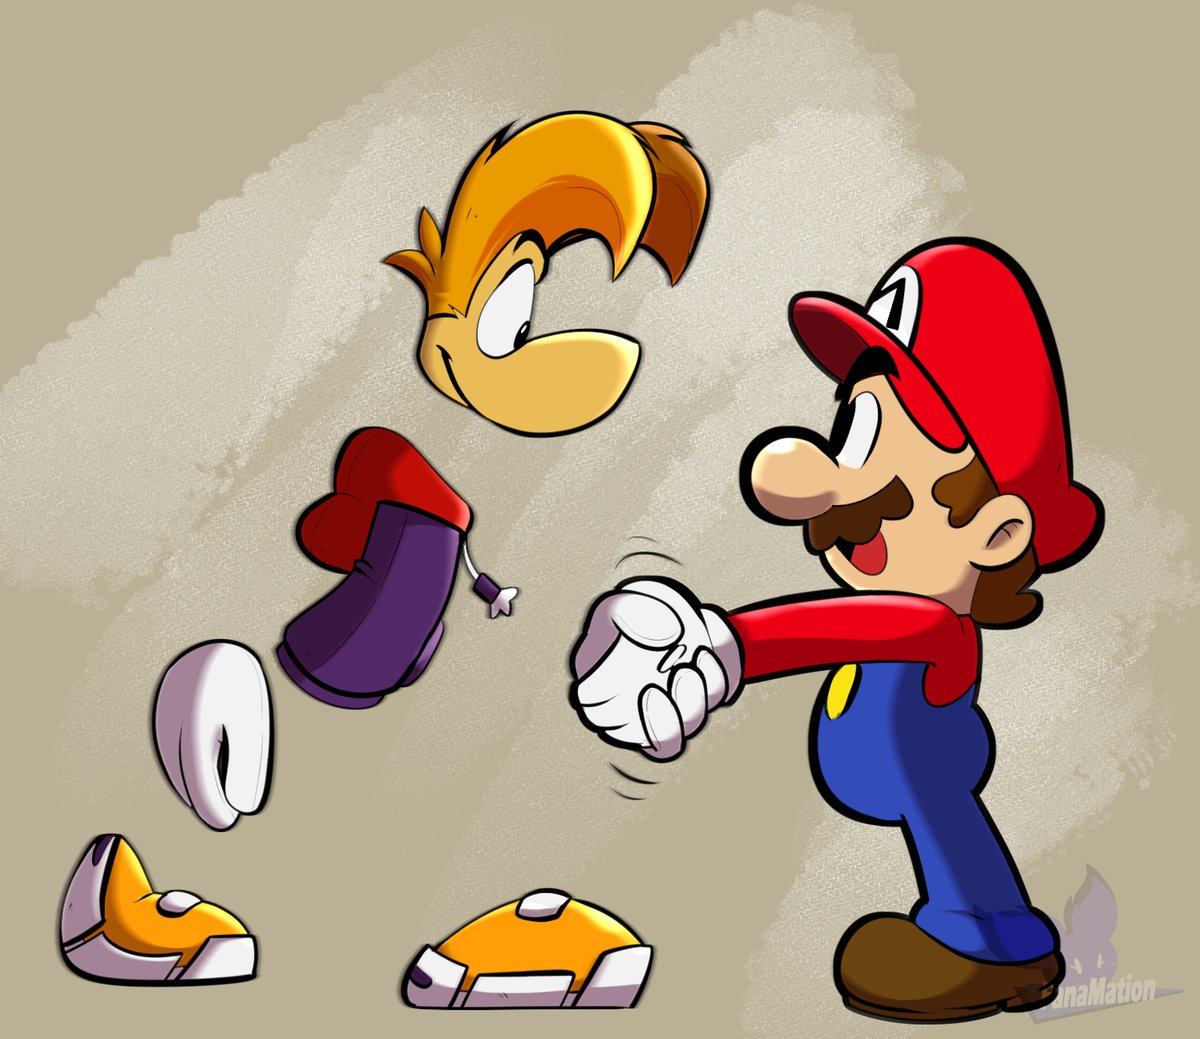 I find it funny that Rayman is taller than Mario